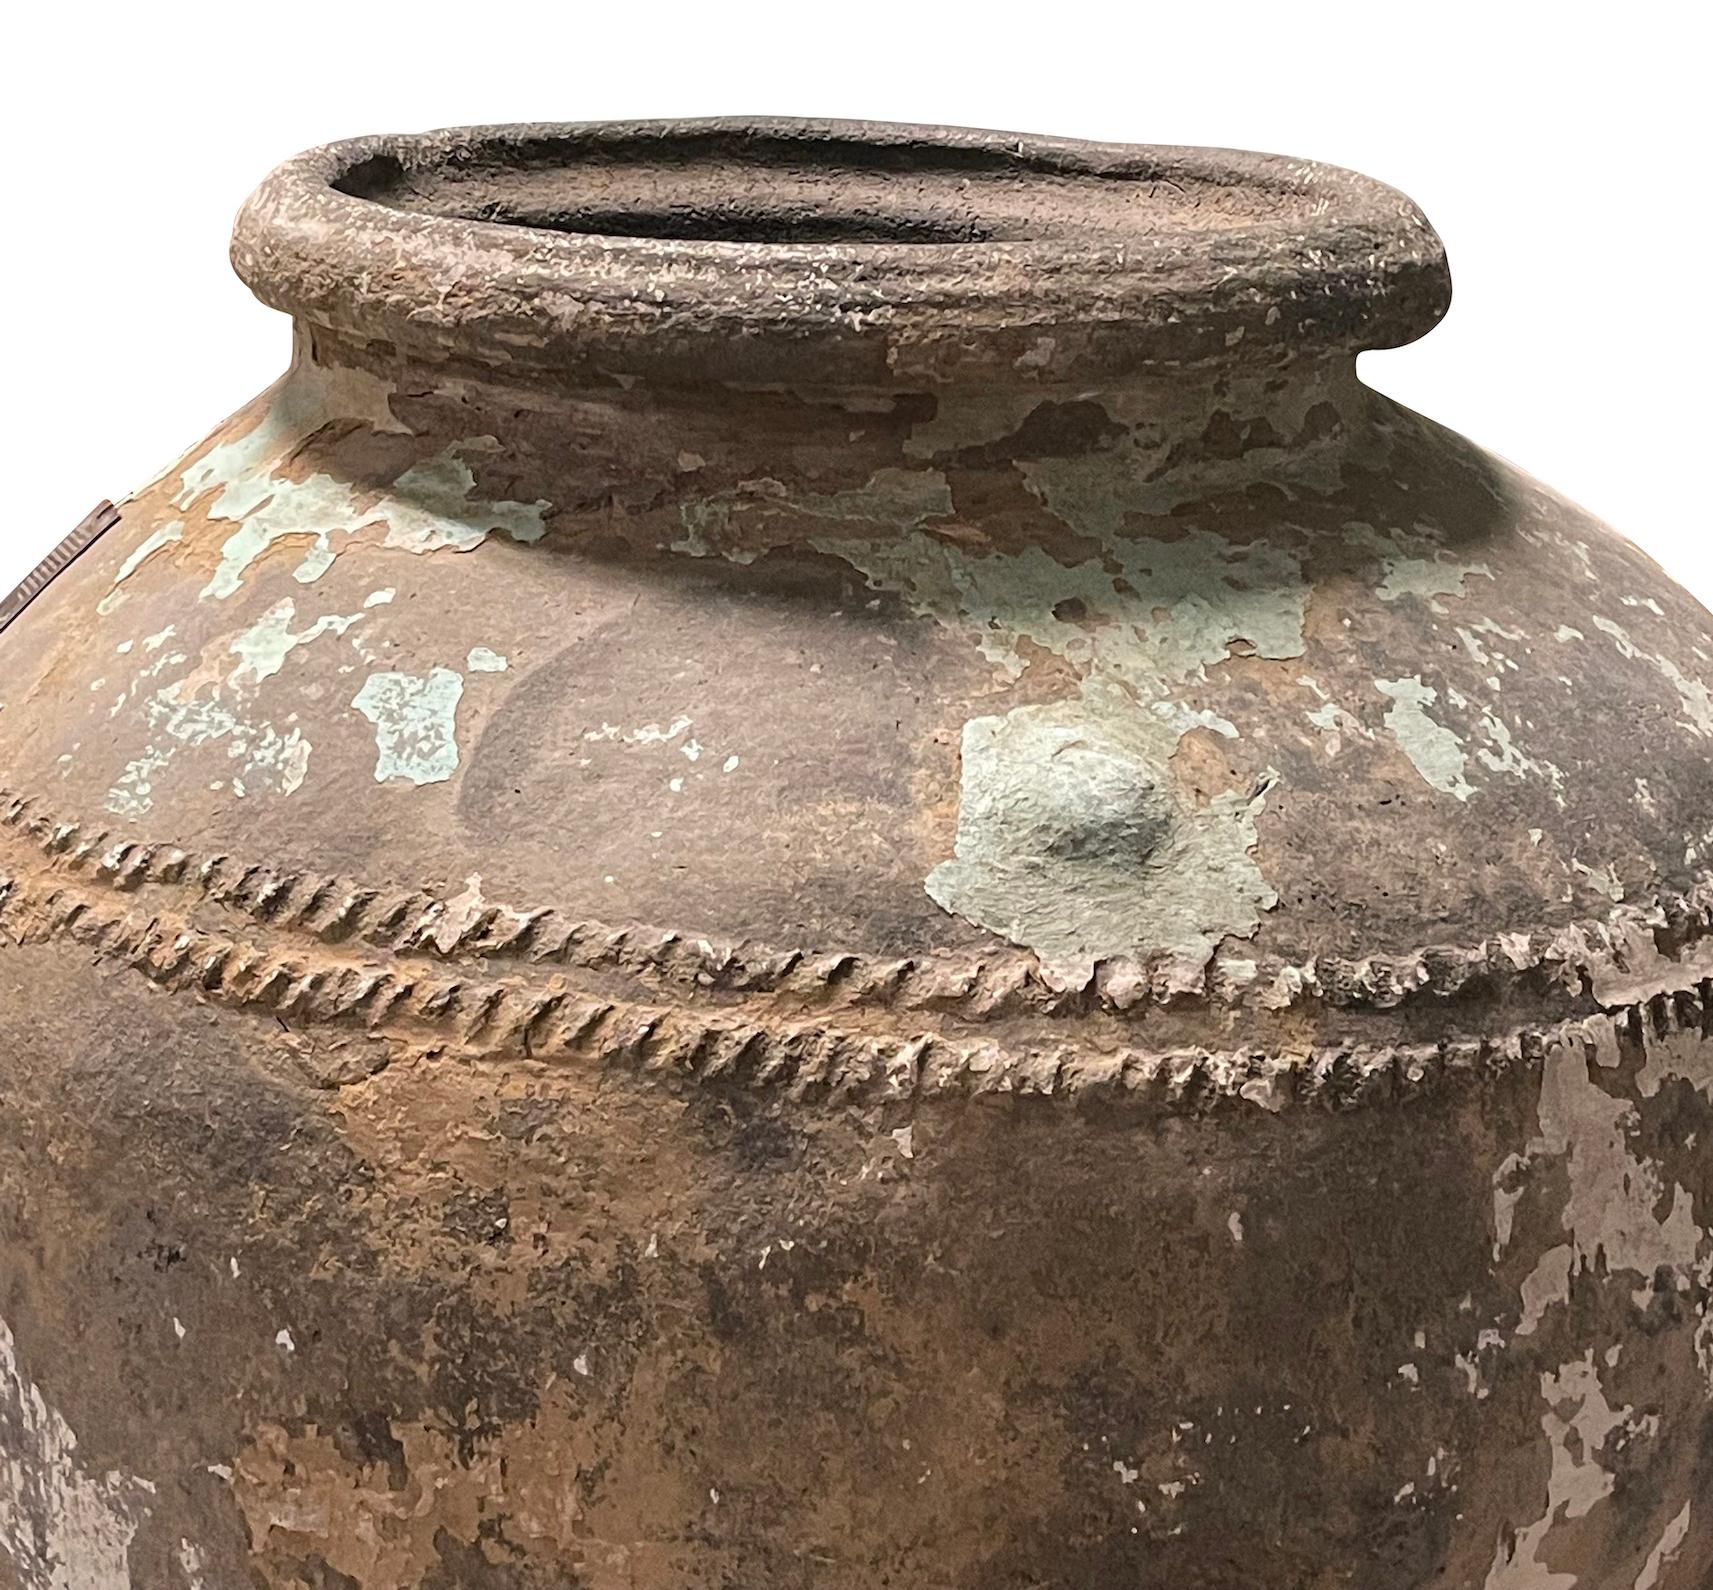 19th century Indian XXL water vessel.
Beautiful natural patina.
Shades of washed blue and white. 
Exceptional size.
Decorative double band raised detailing.
ARRIVING NOVEMBER.